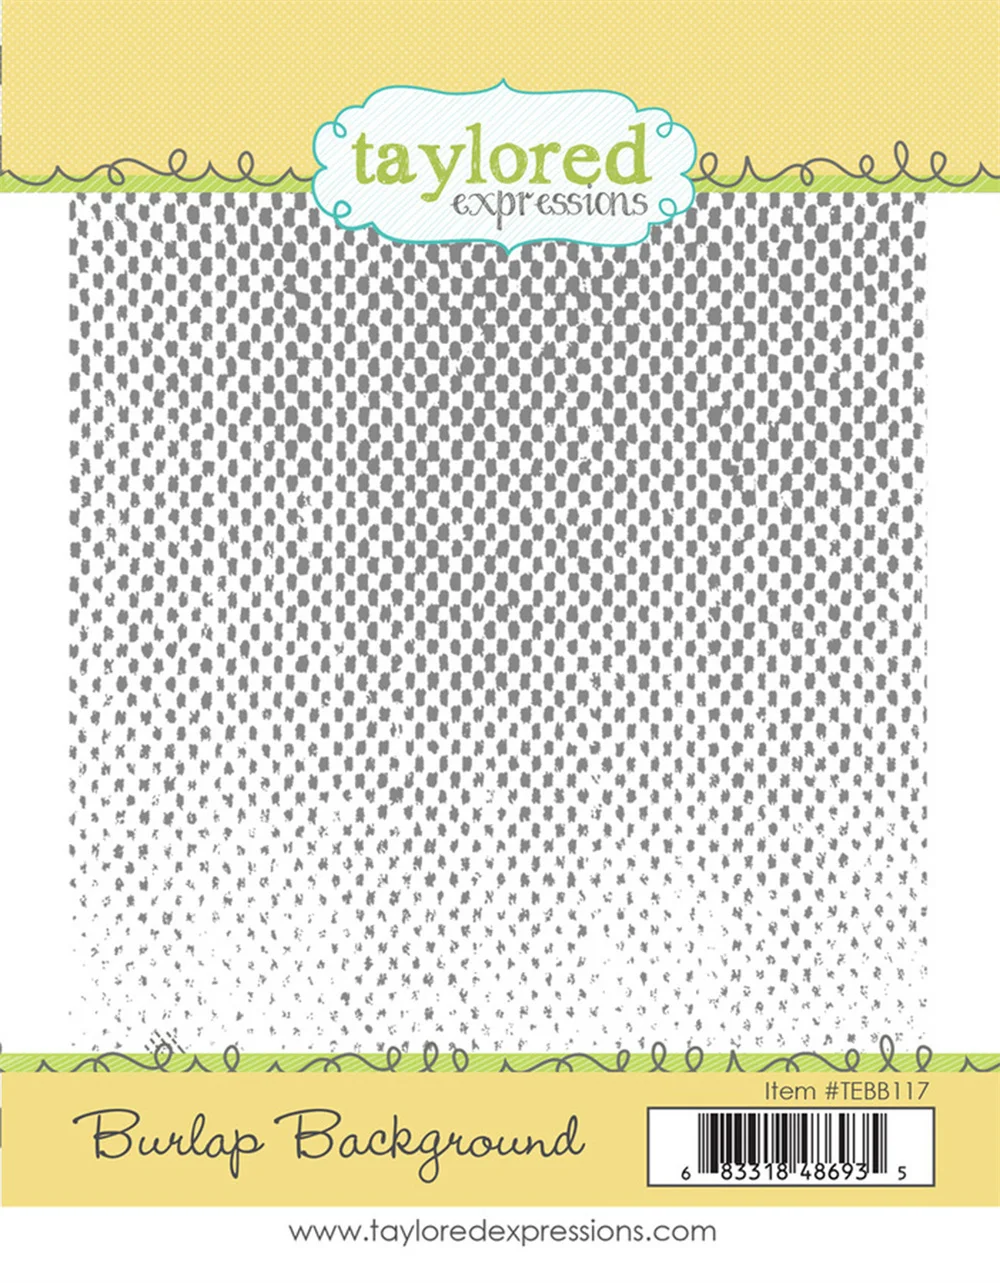 

Top Selling Burlap Background 2021 Arrival New Metal Cutting Stencil Diary Scrapbooking Easter Craft Engraving Making Stencil